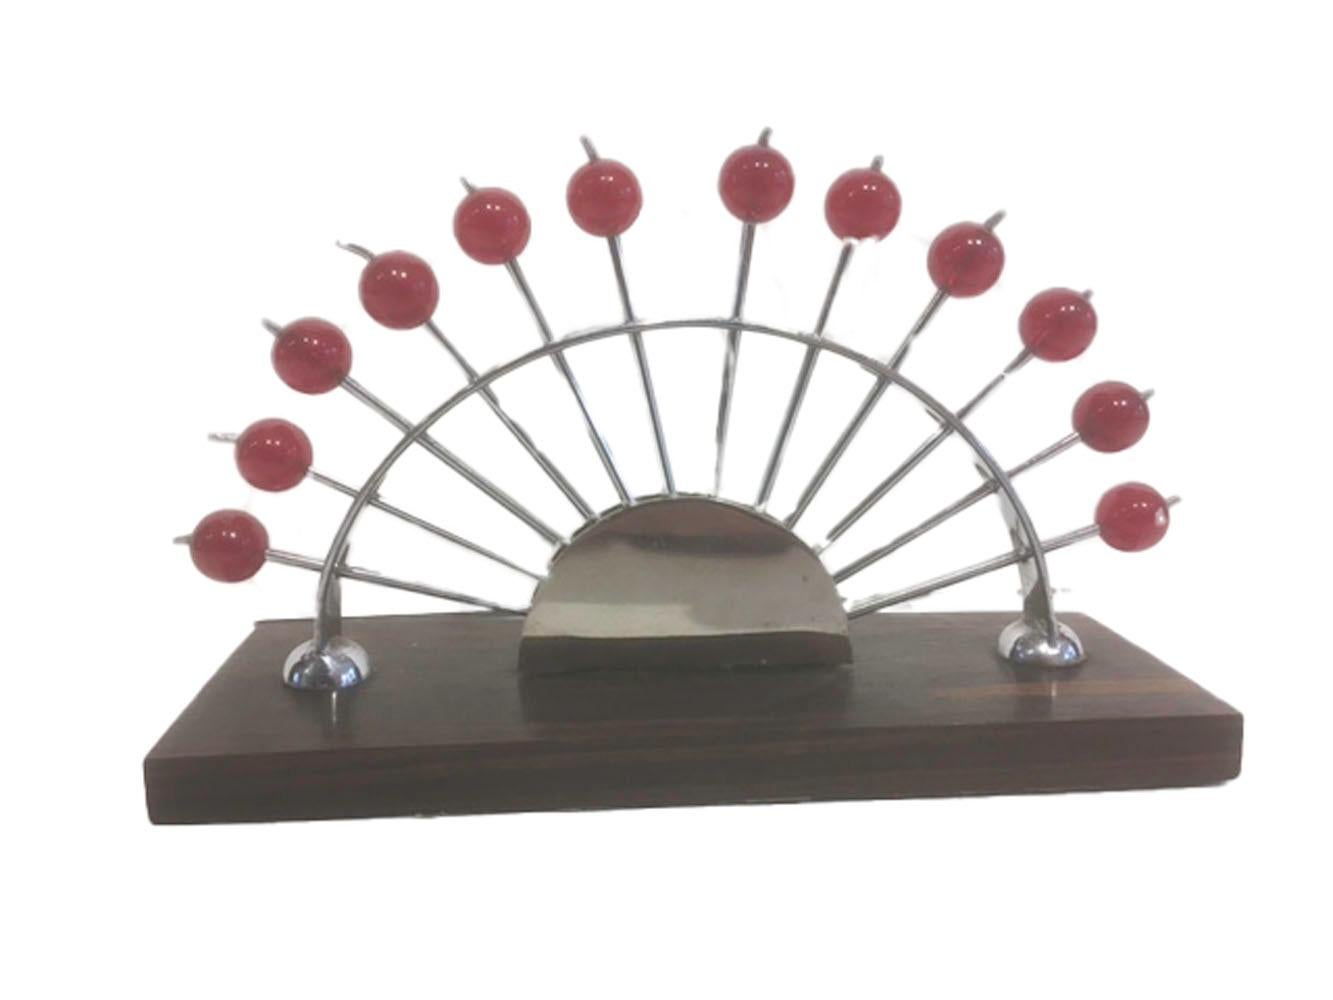 Art Deco cocktail picks in a fan-form stand. The forked chrome picks with red ball tops finished with a small chrome stem. The arched holder has 12 holes to accommodate the picks with the points enclosed in a semicircular chrome guard, all set on an